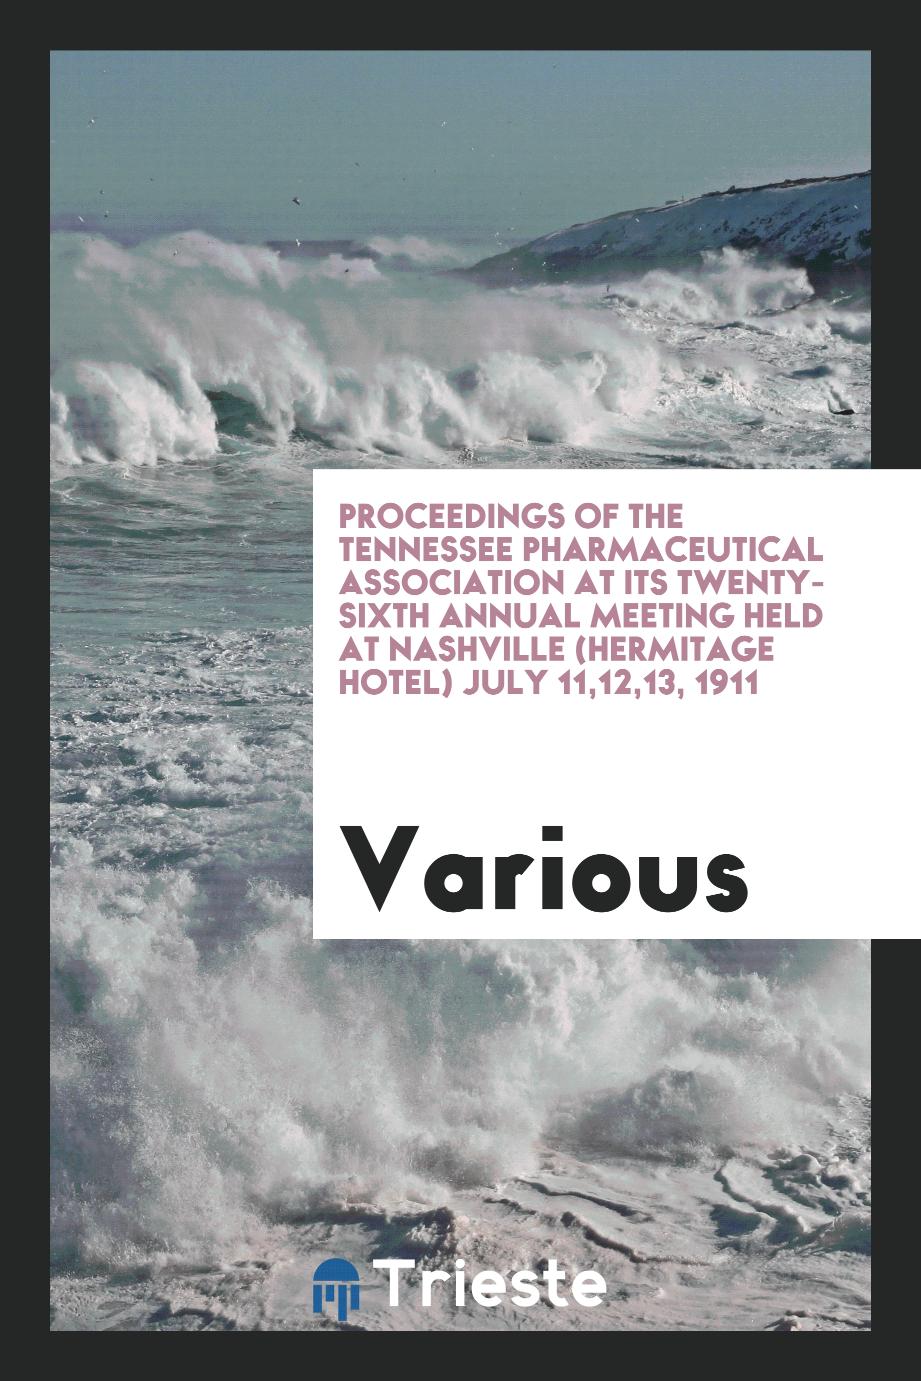 Proceedings of the Tennessee Pharmaceutical Association at its Twenty-Sixth Annual Meeting held at Nashville (Hermitage Hotel) July 11,12,13, 1911